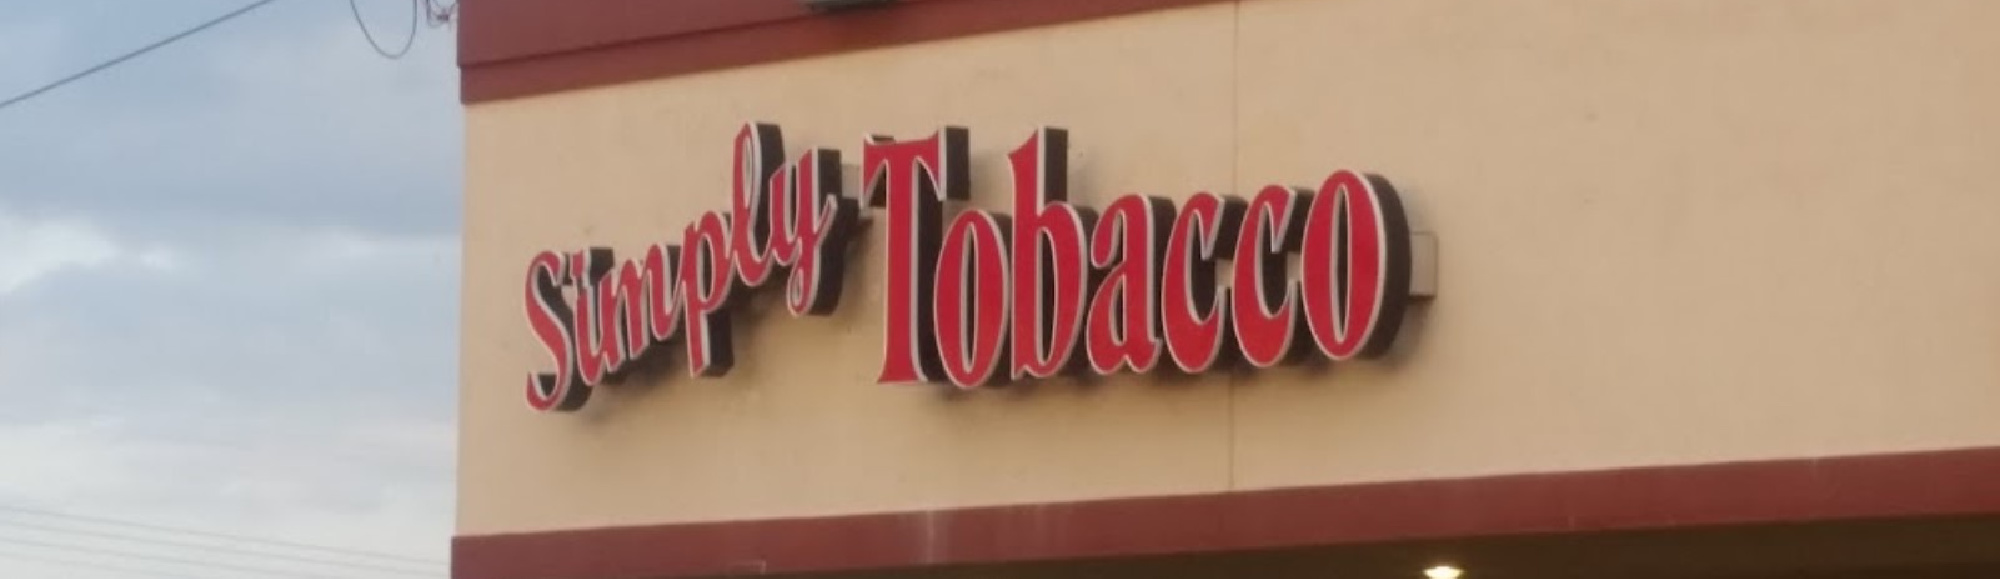 image of simply tobacco club in gulfport ms